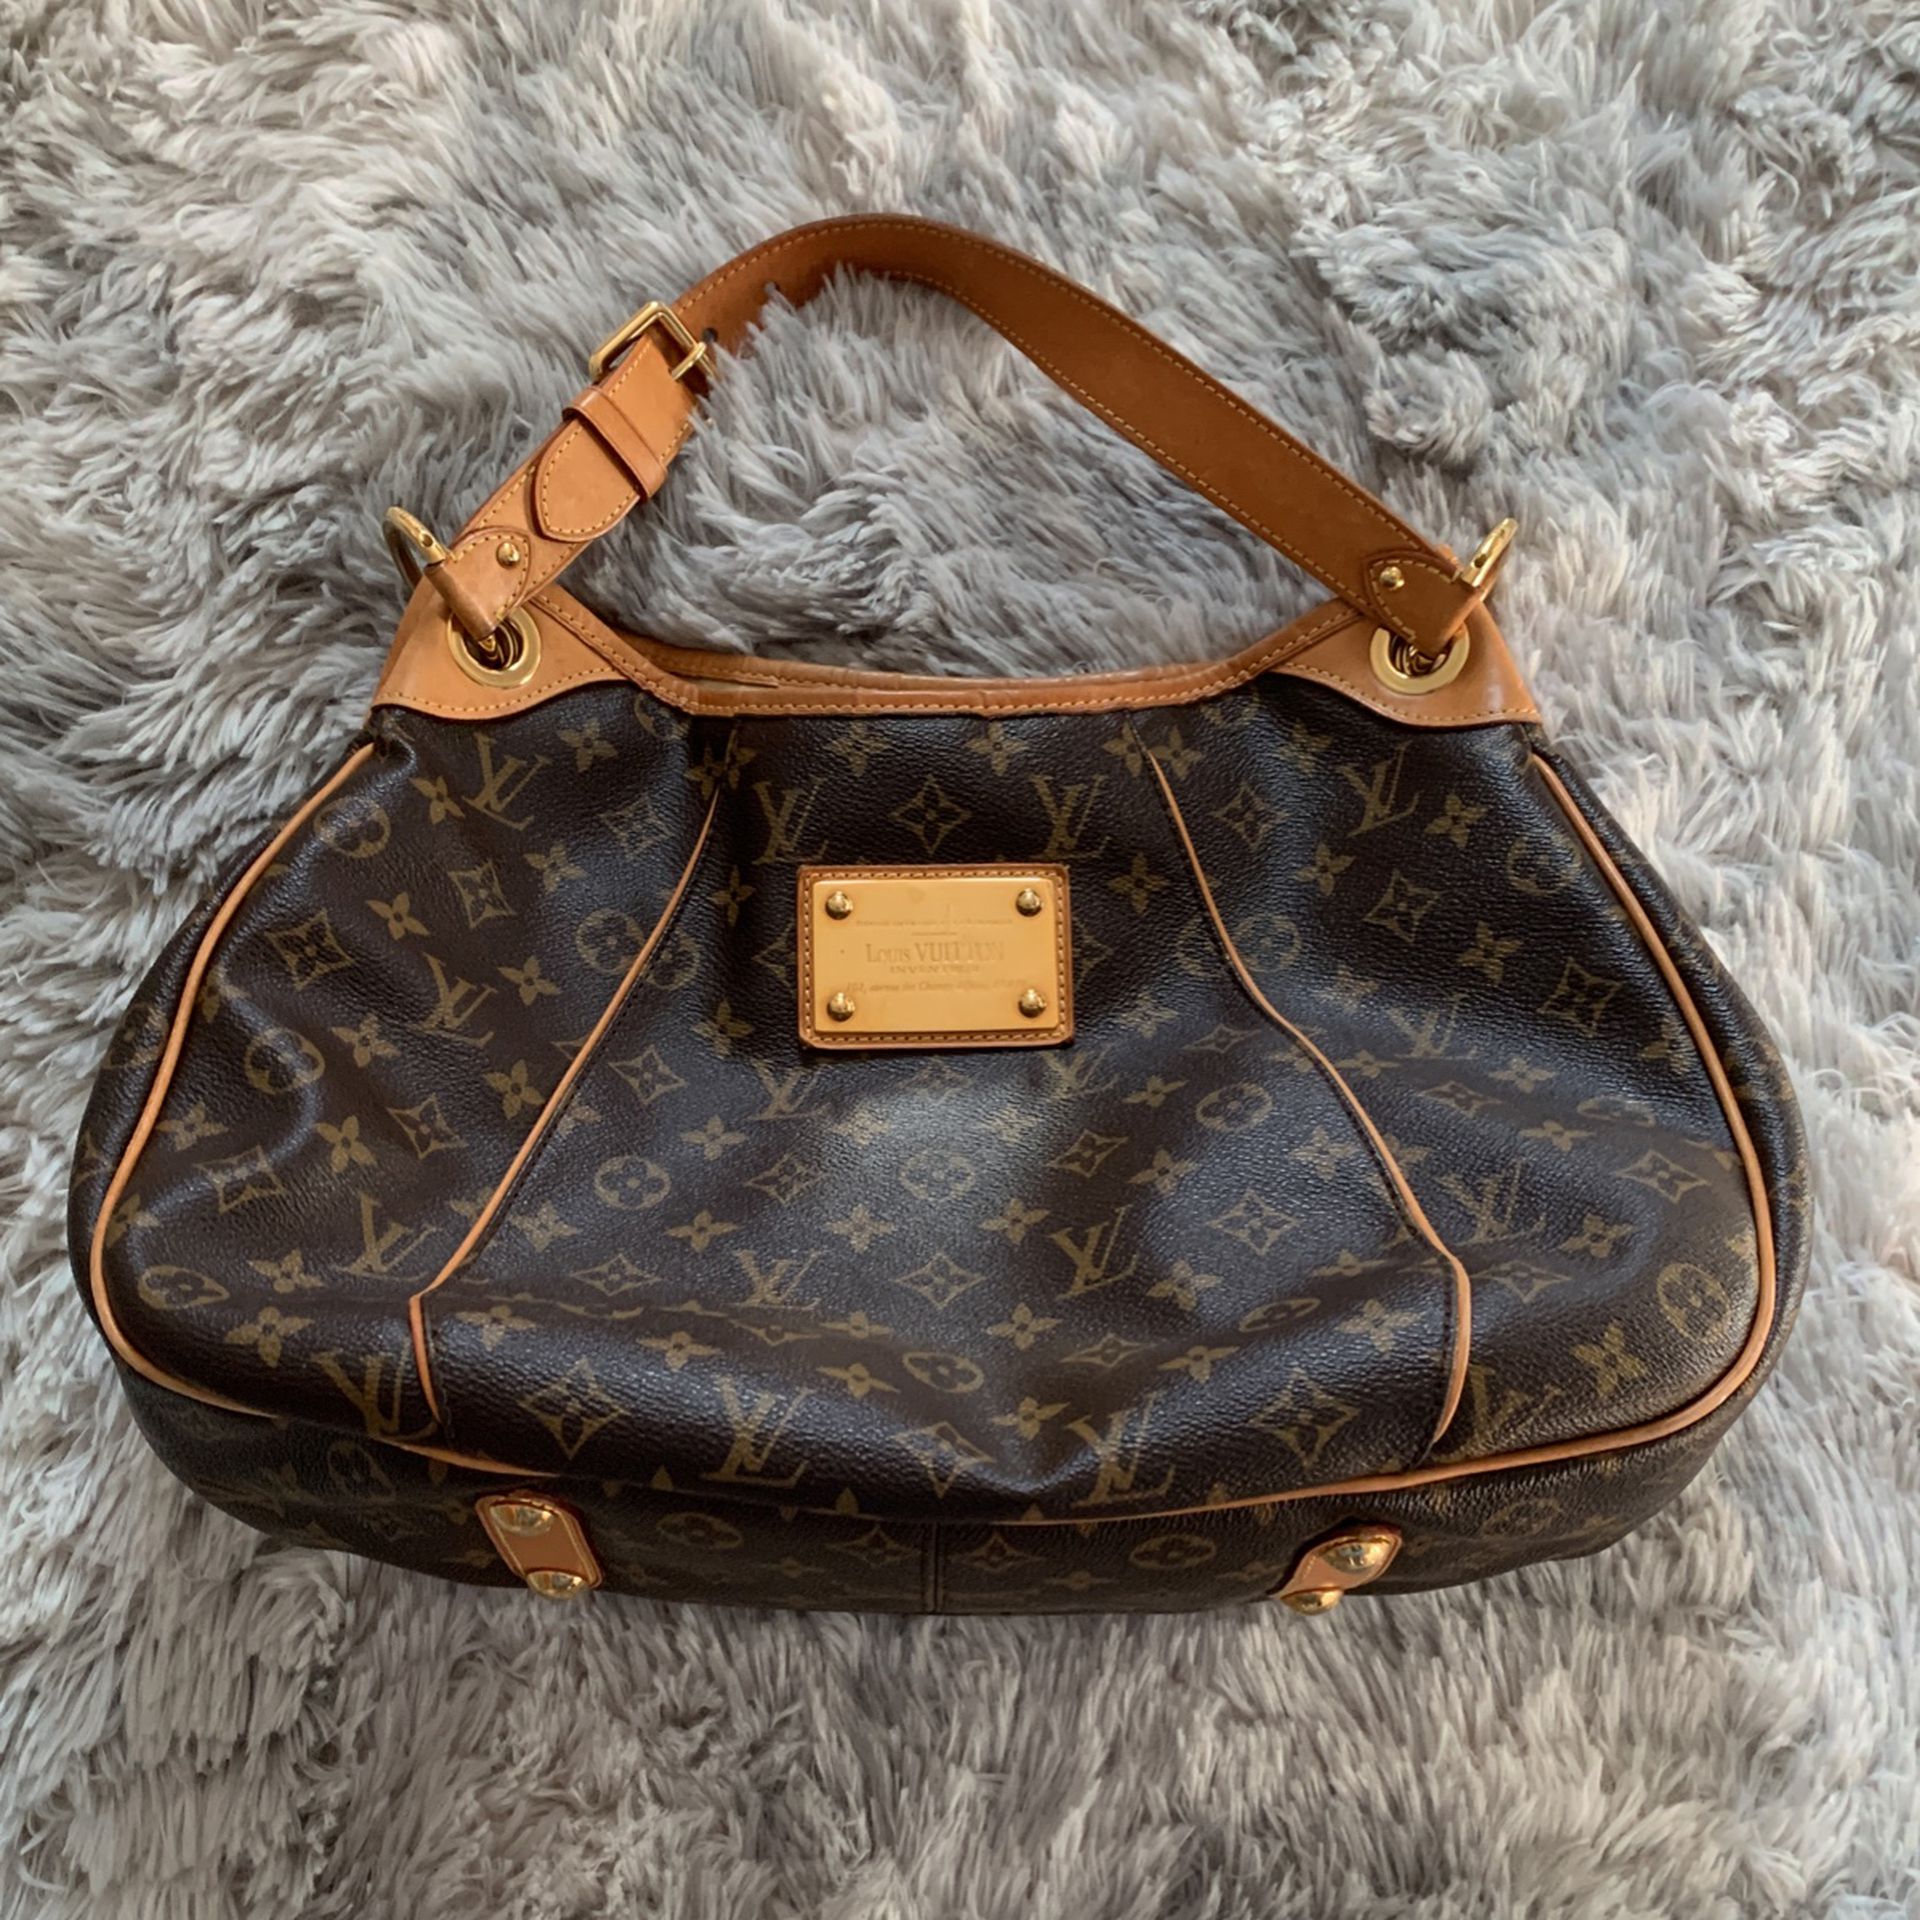 Used Luis Vuitton Bag for Sale in Liverpool, NY - OfferUp